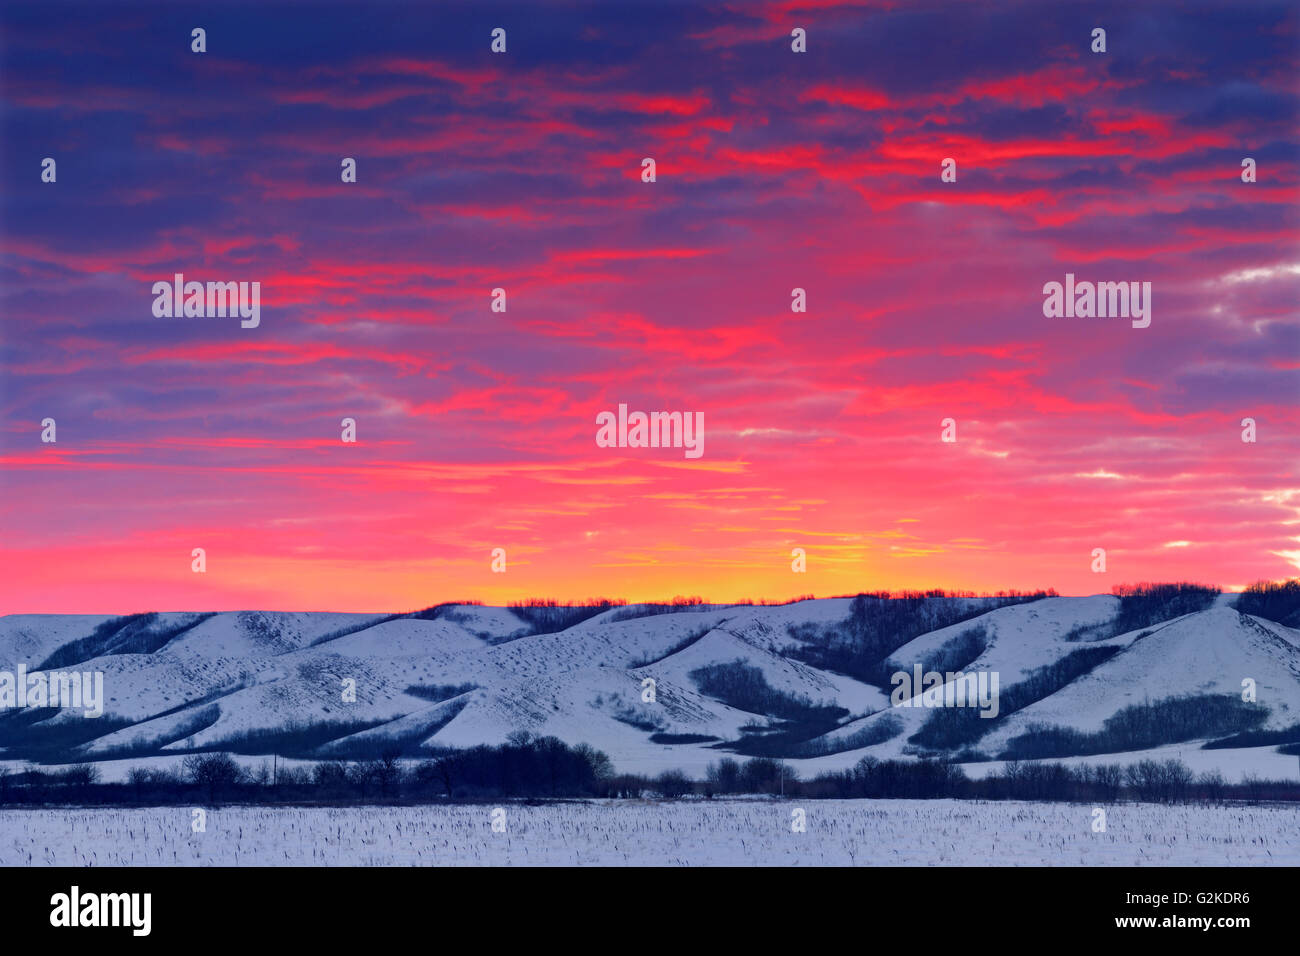 Dawn light on the hills of the Qu' Appelle Valley in winter near Craven  Saskatchewan Canada Stock Photo